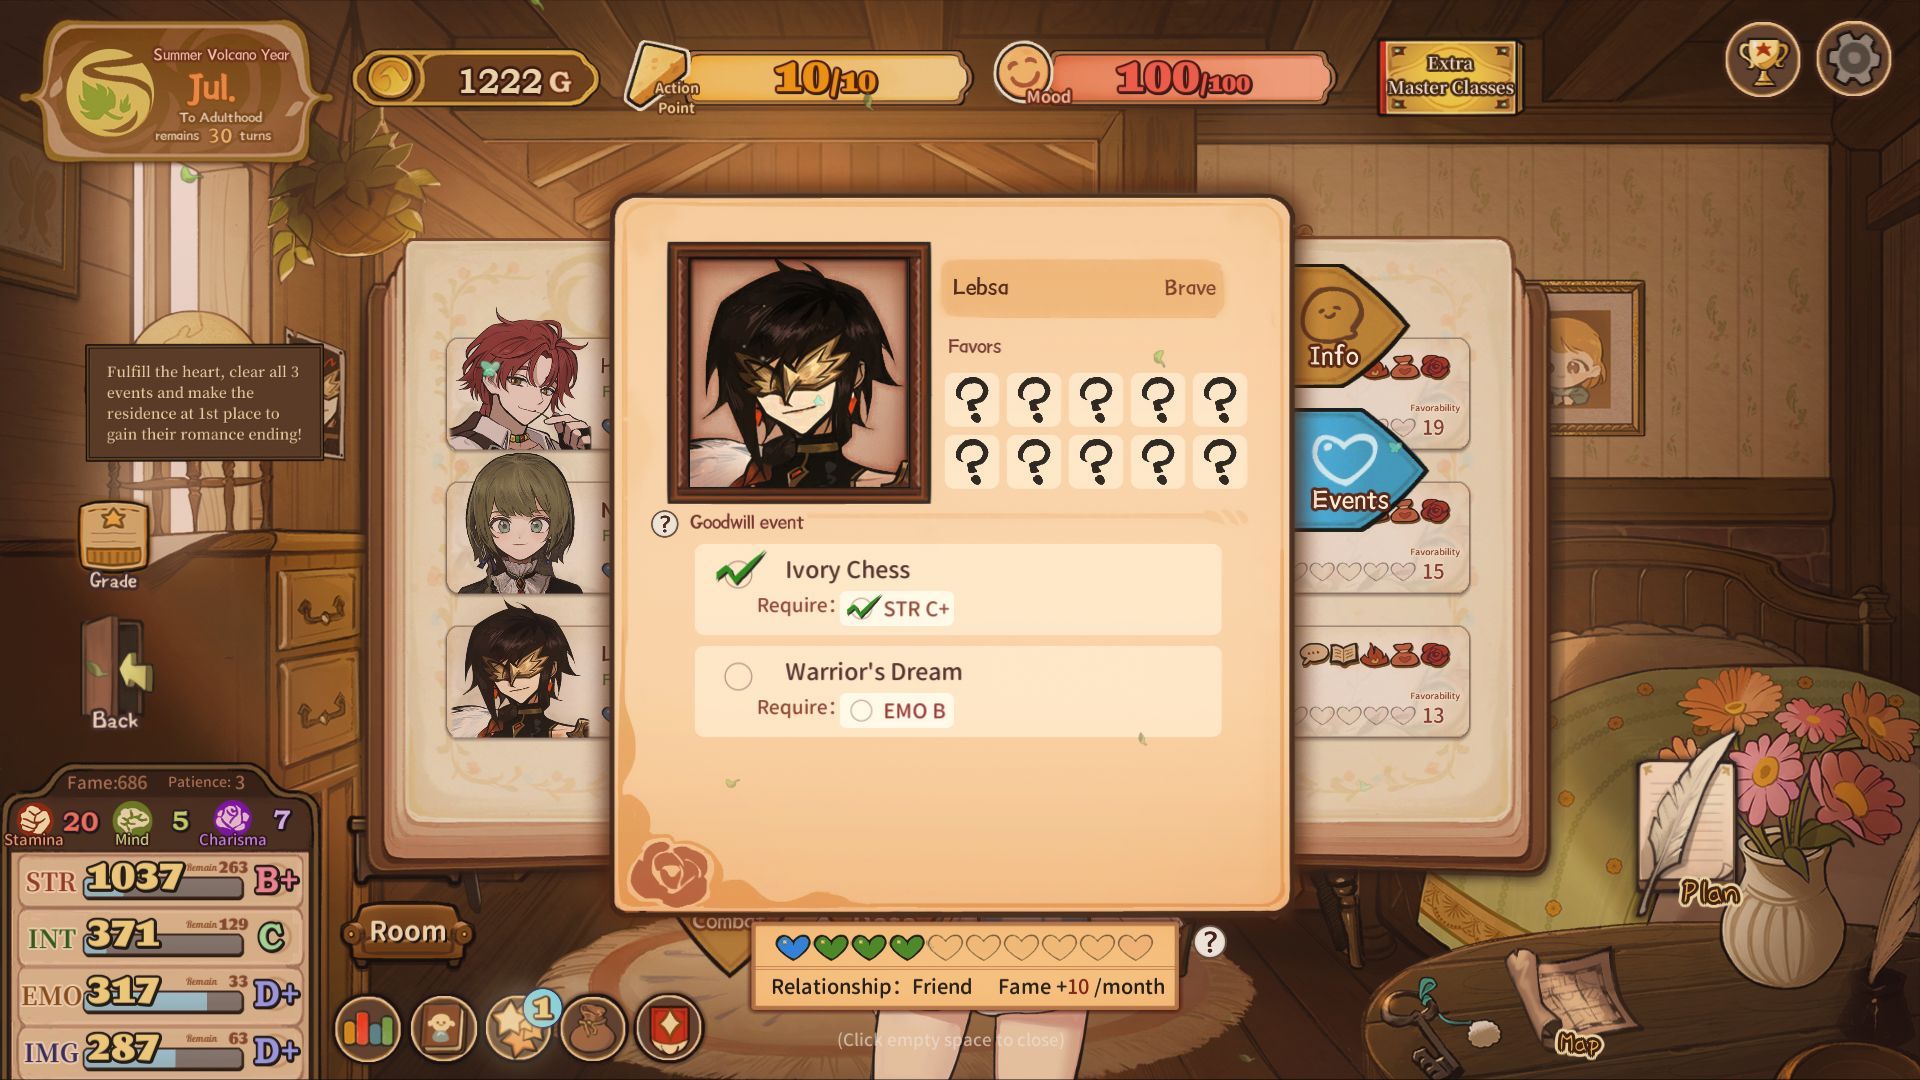 Journal displays status requirements to increase friendship with each character